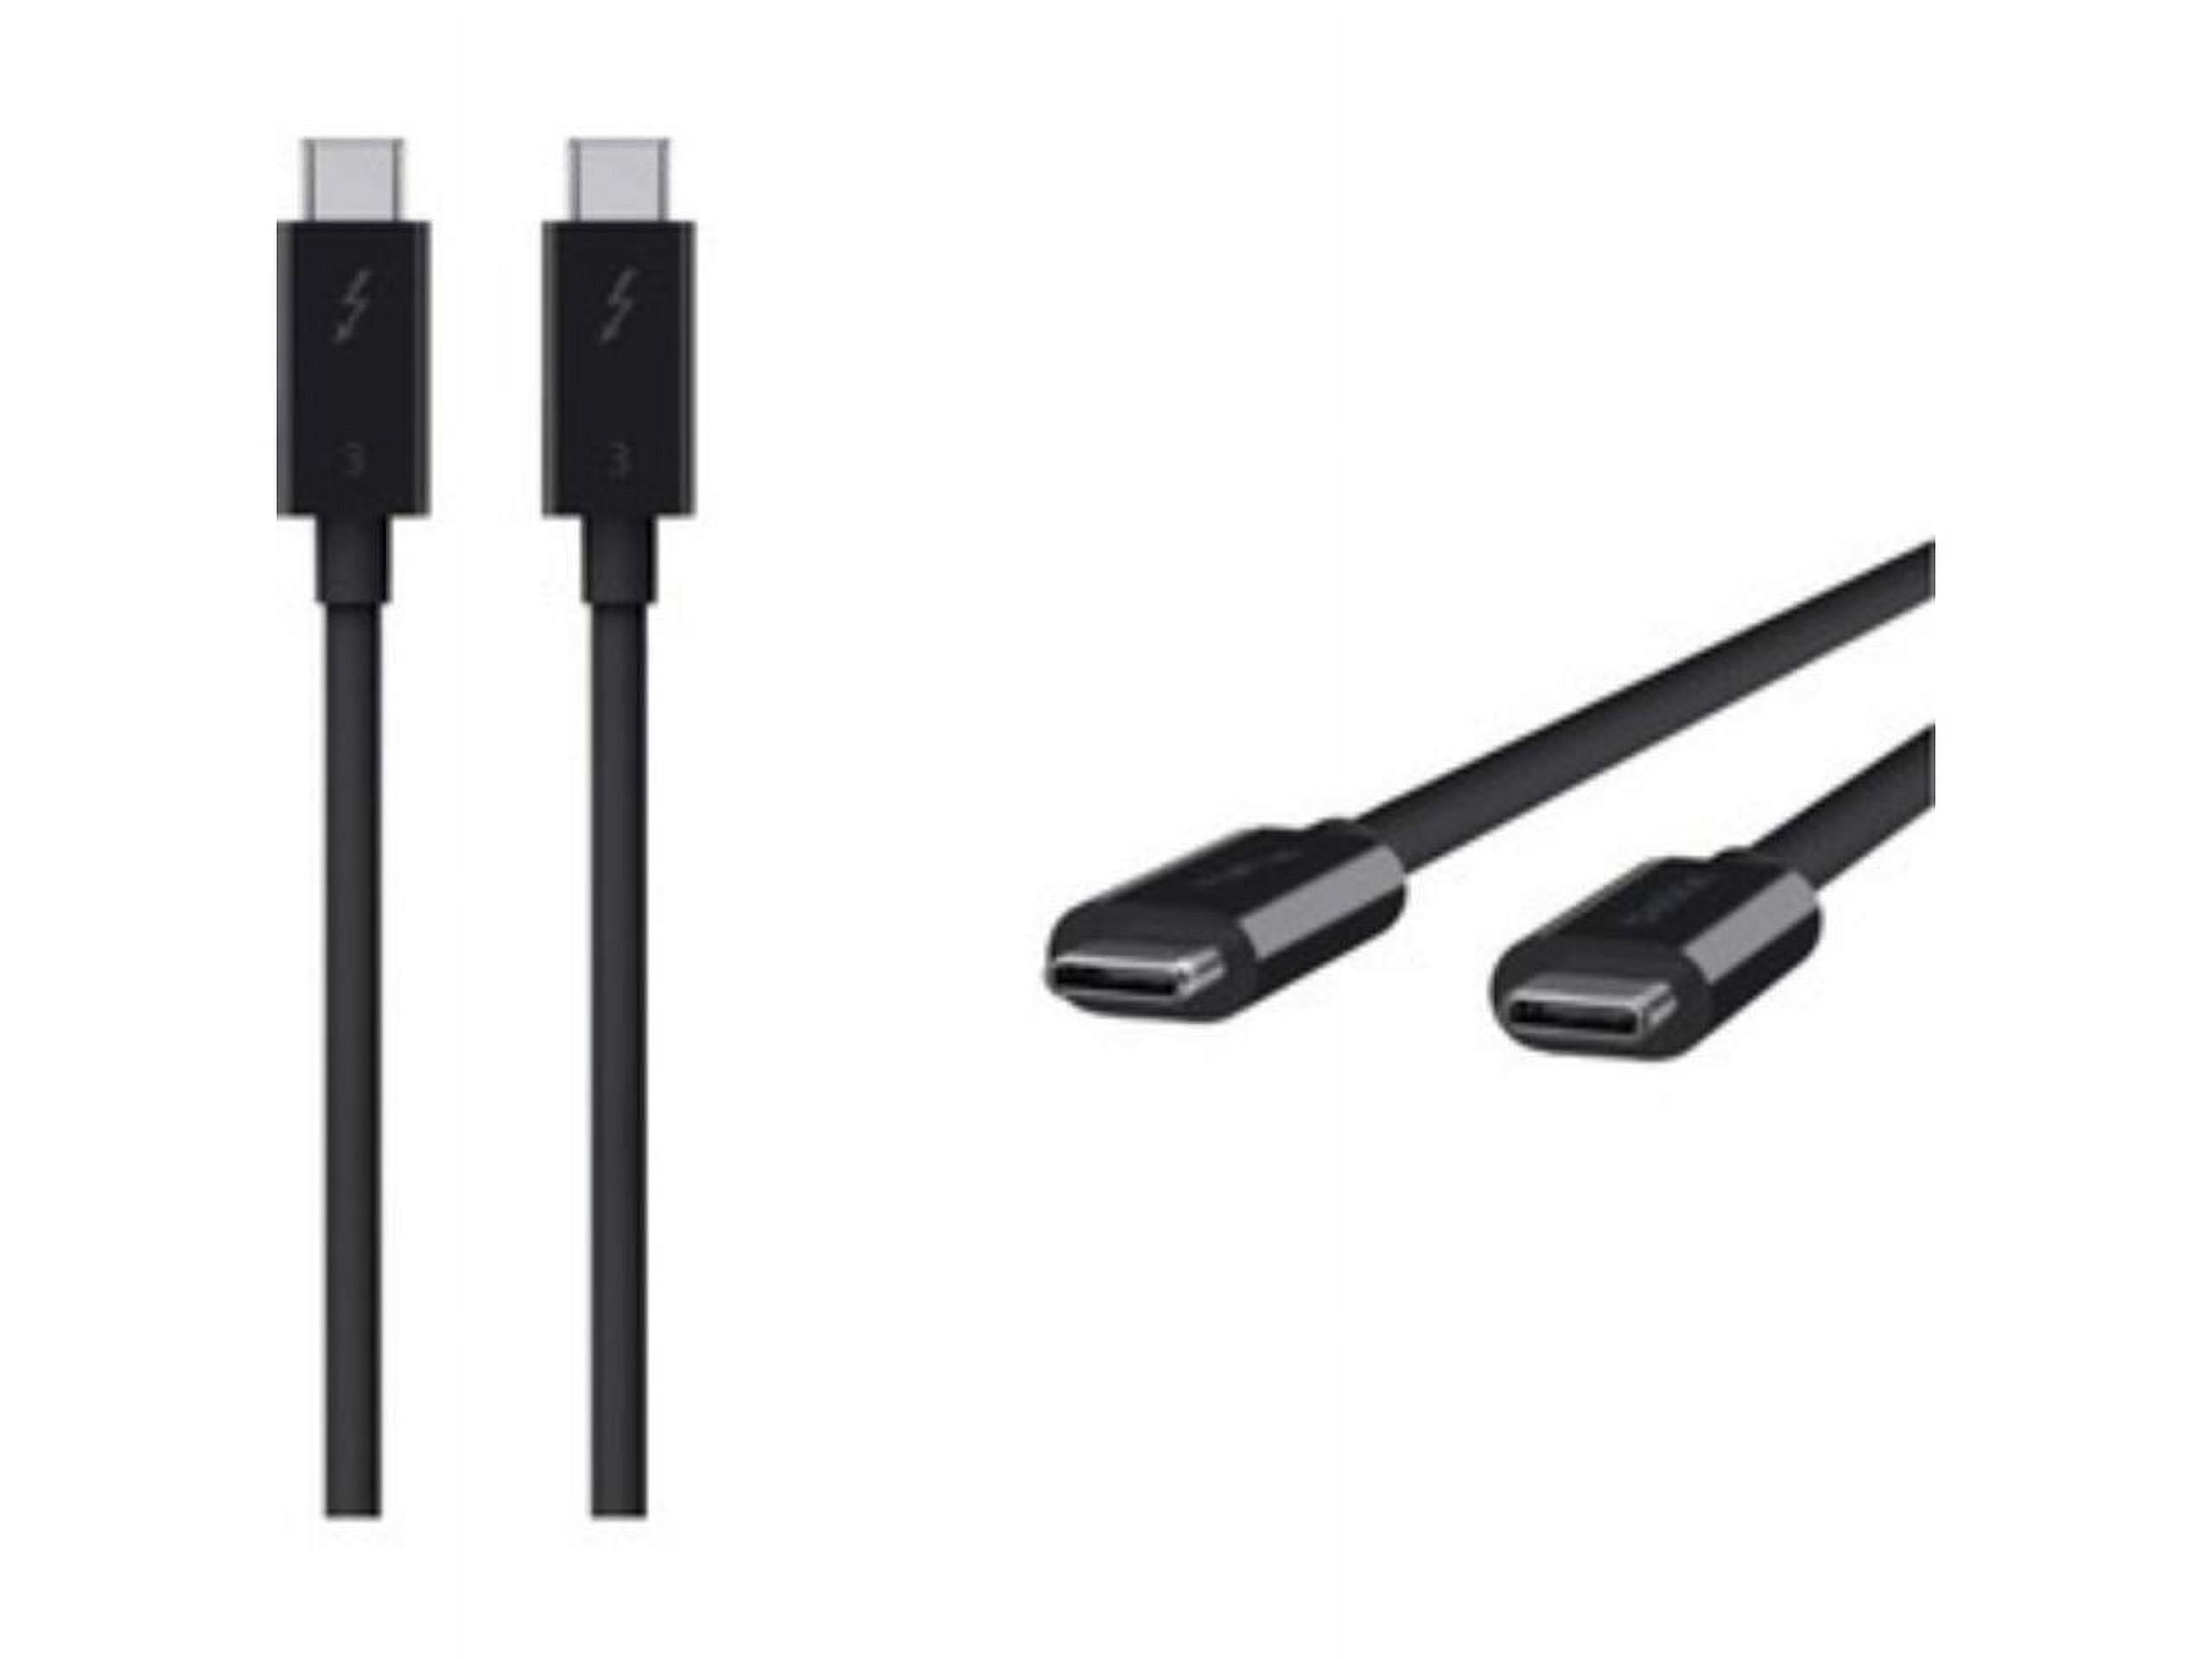 Belkin Thunderbolt 3 Cable, F2CD084 - image 1 of 12